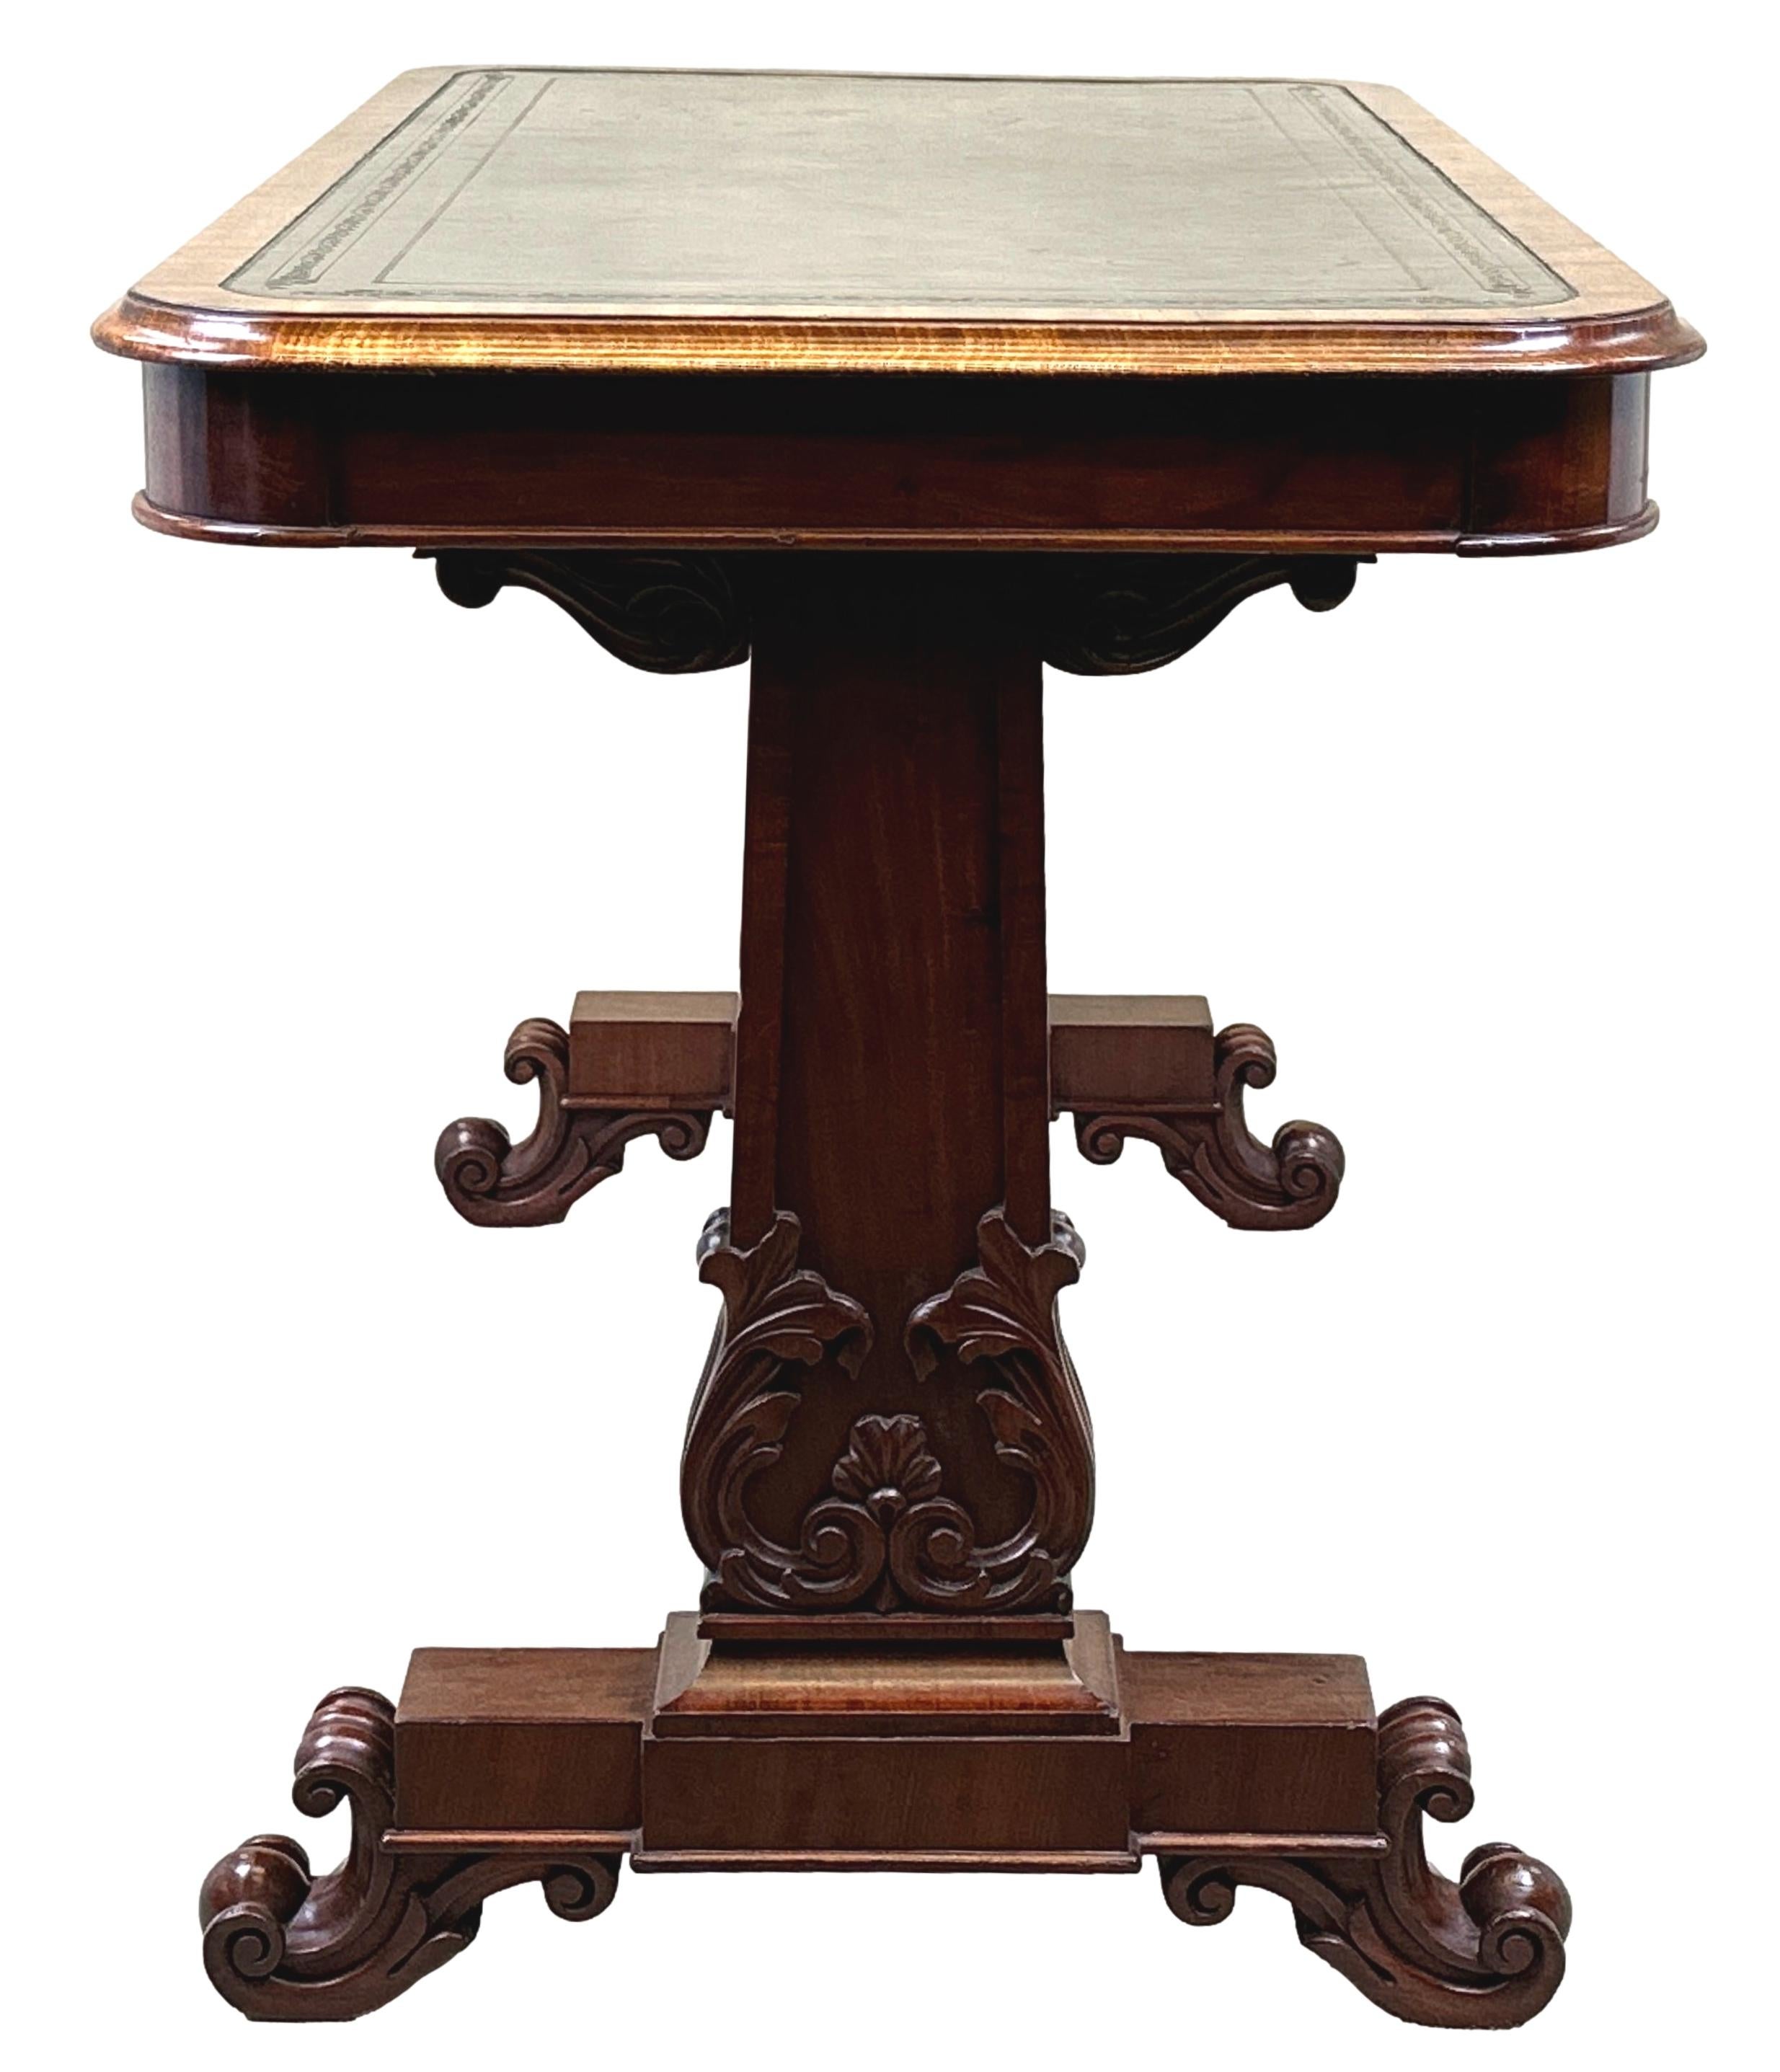 A Very Good Quality Late Regency Period Mahogany End Support Writing Table, Or Library Table, Having Attractive Old Leather Inset Top With Tooled Decoration, Over Two Shallow Frieze Drawers Stamped With Makers Initials Of JS, Raised On Tablet Type